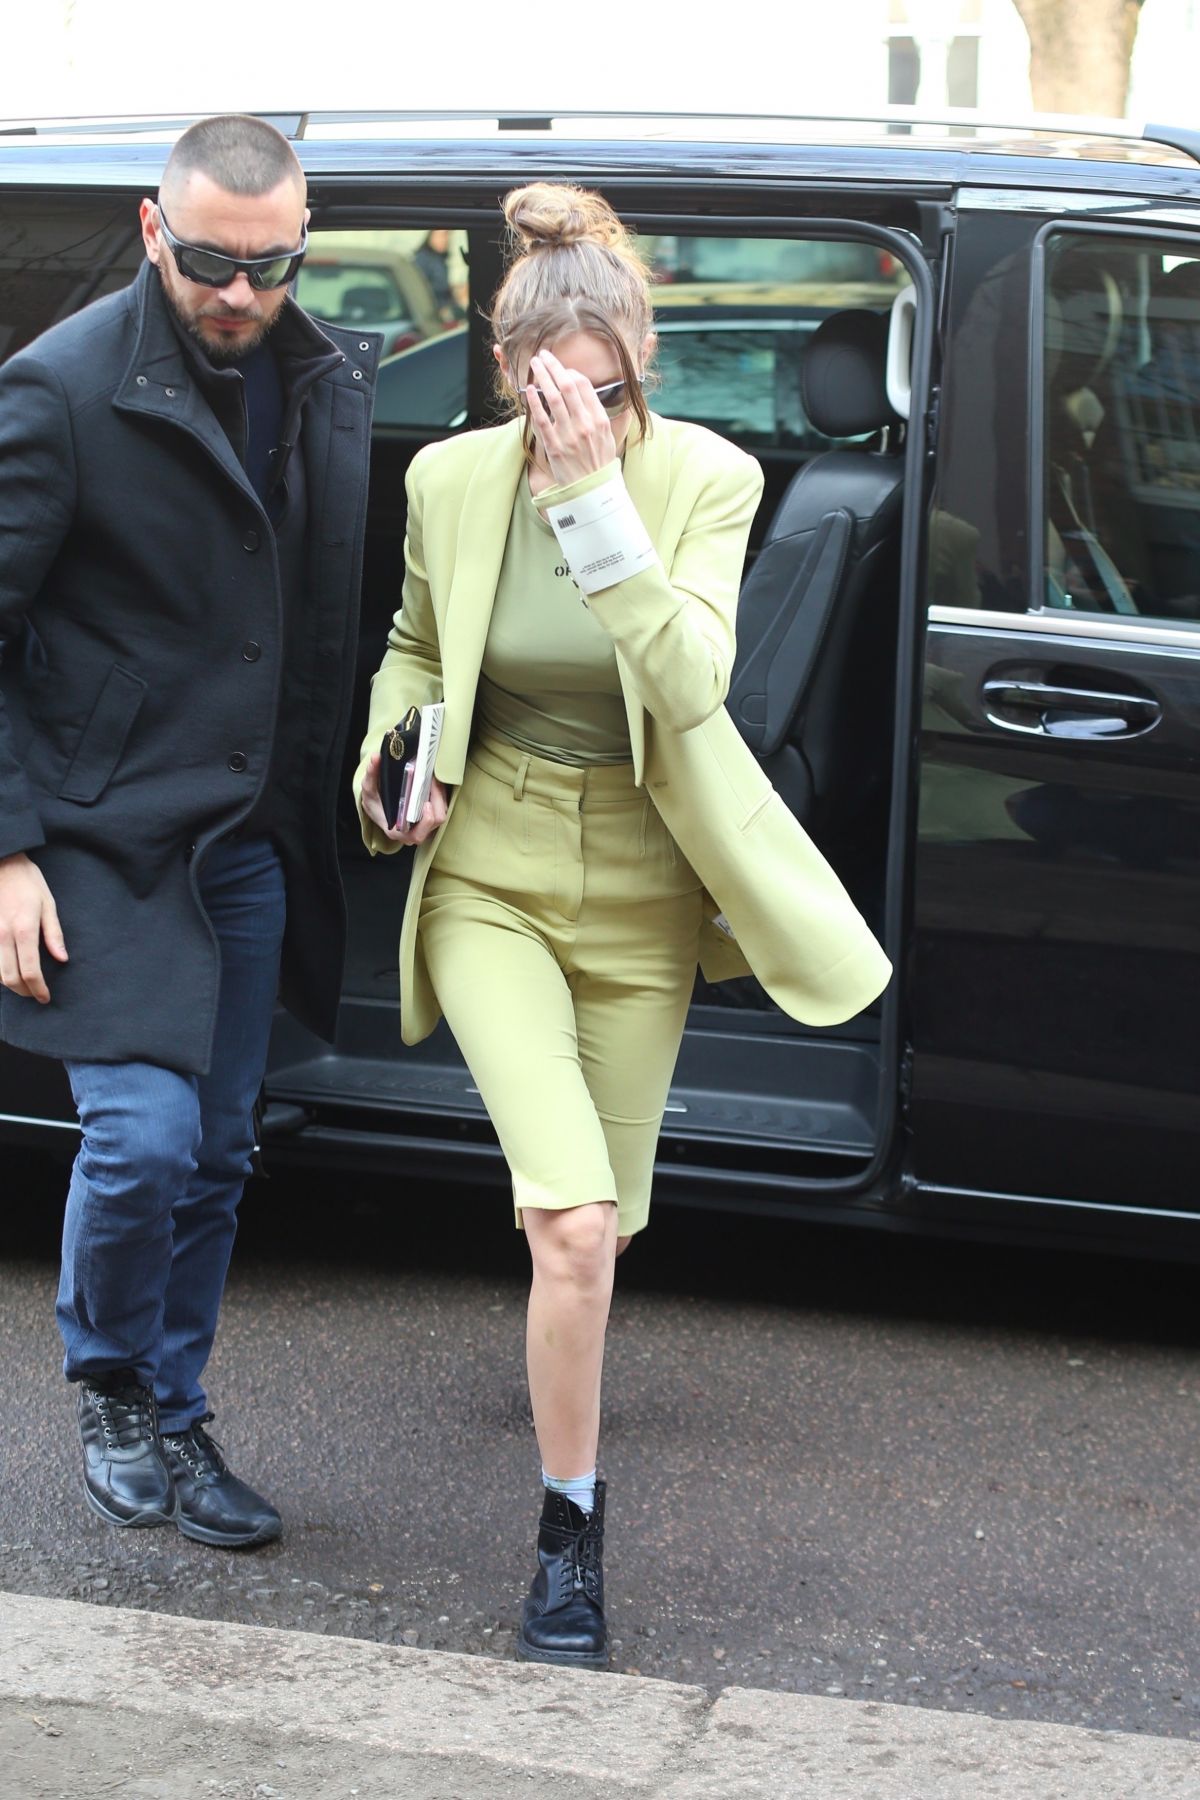 gigi-hadid-out-and-about-in-milan-02-21-2019-2.jpg